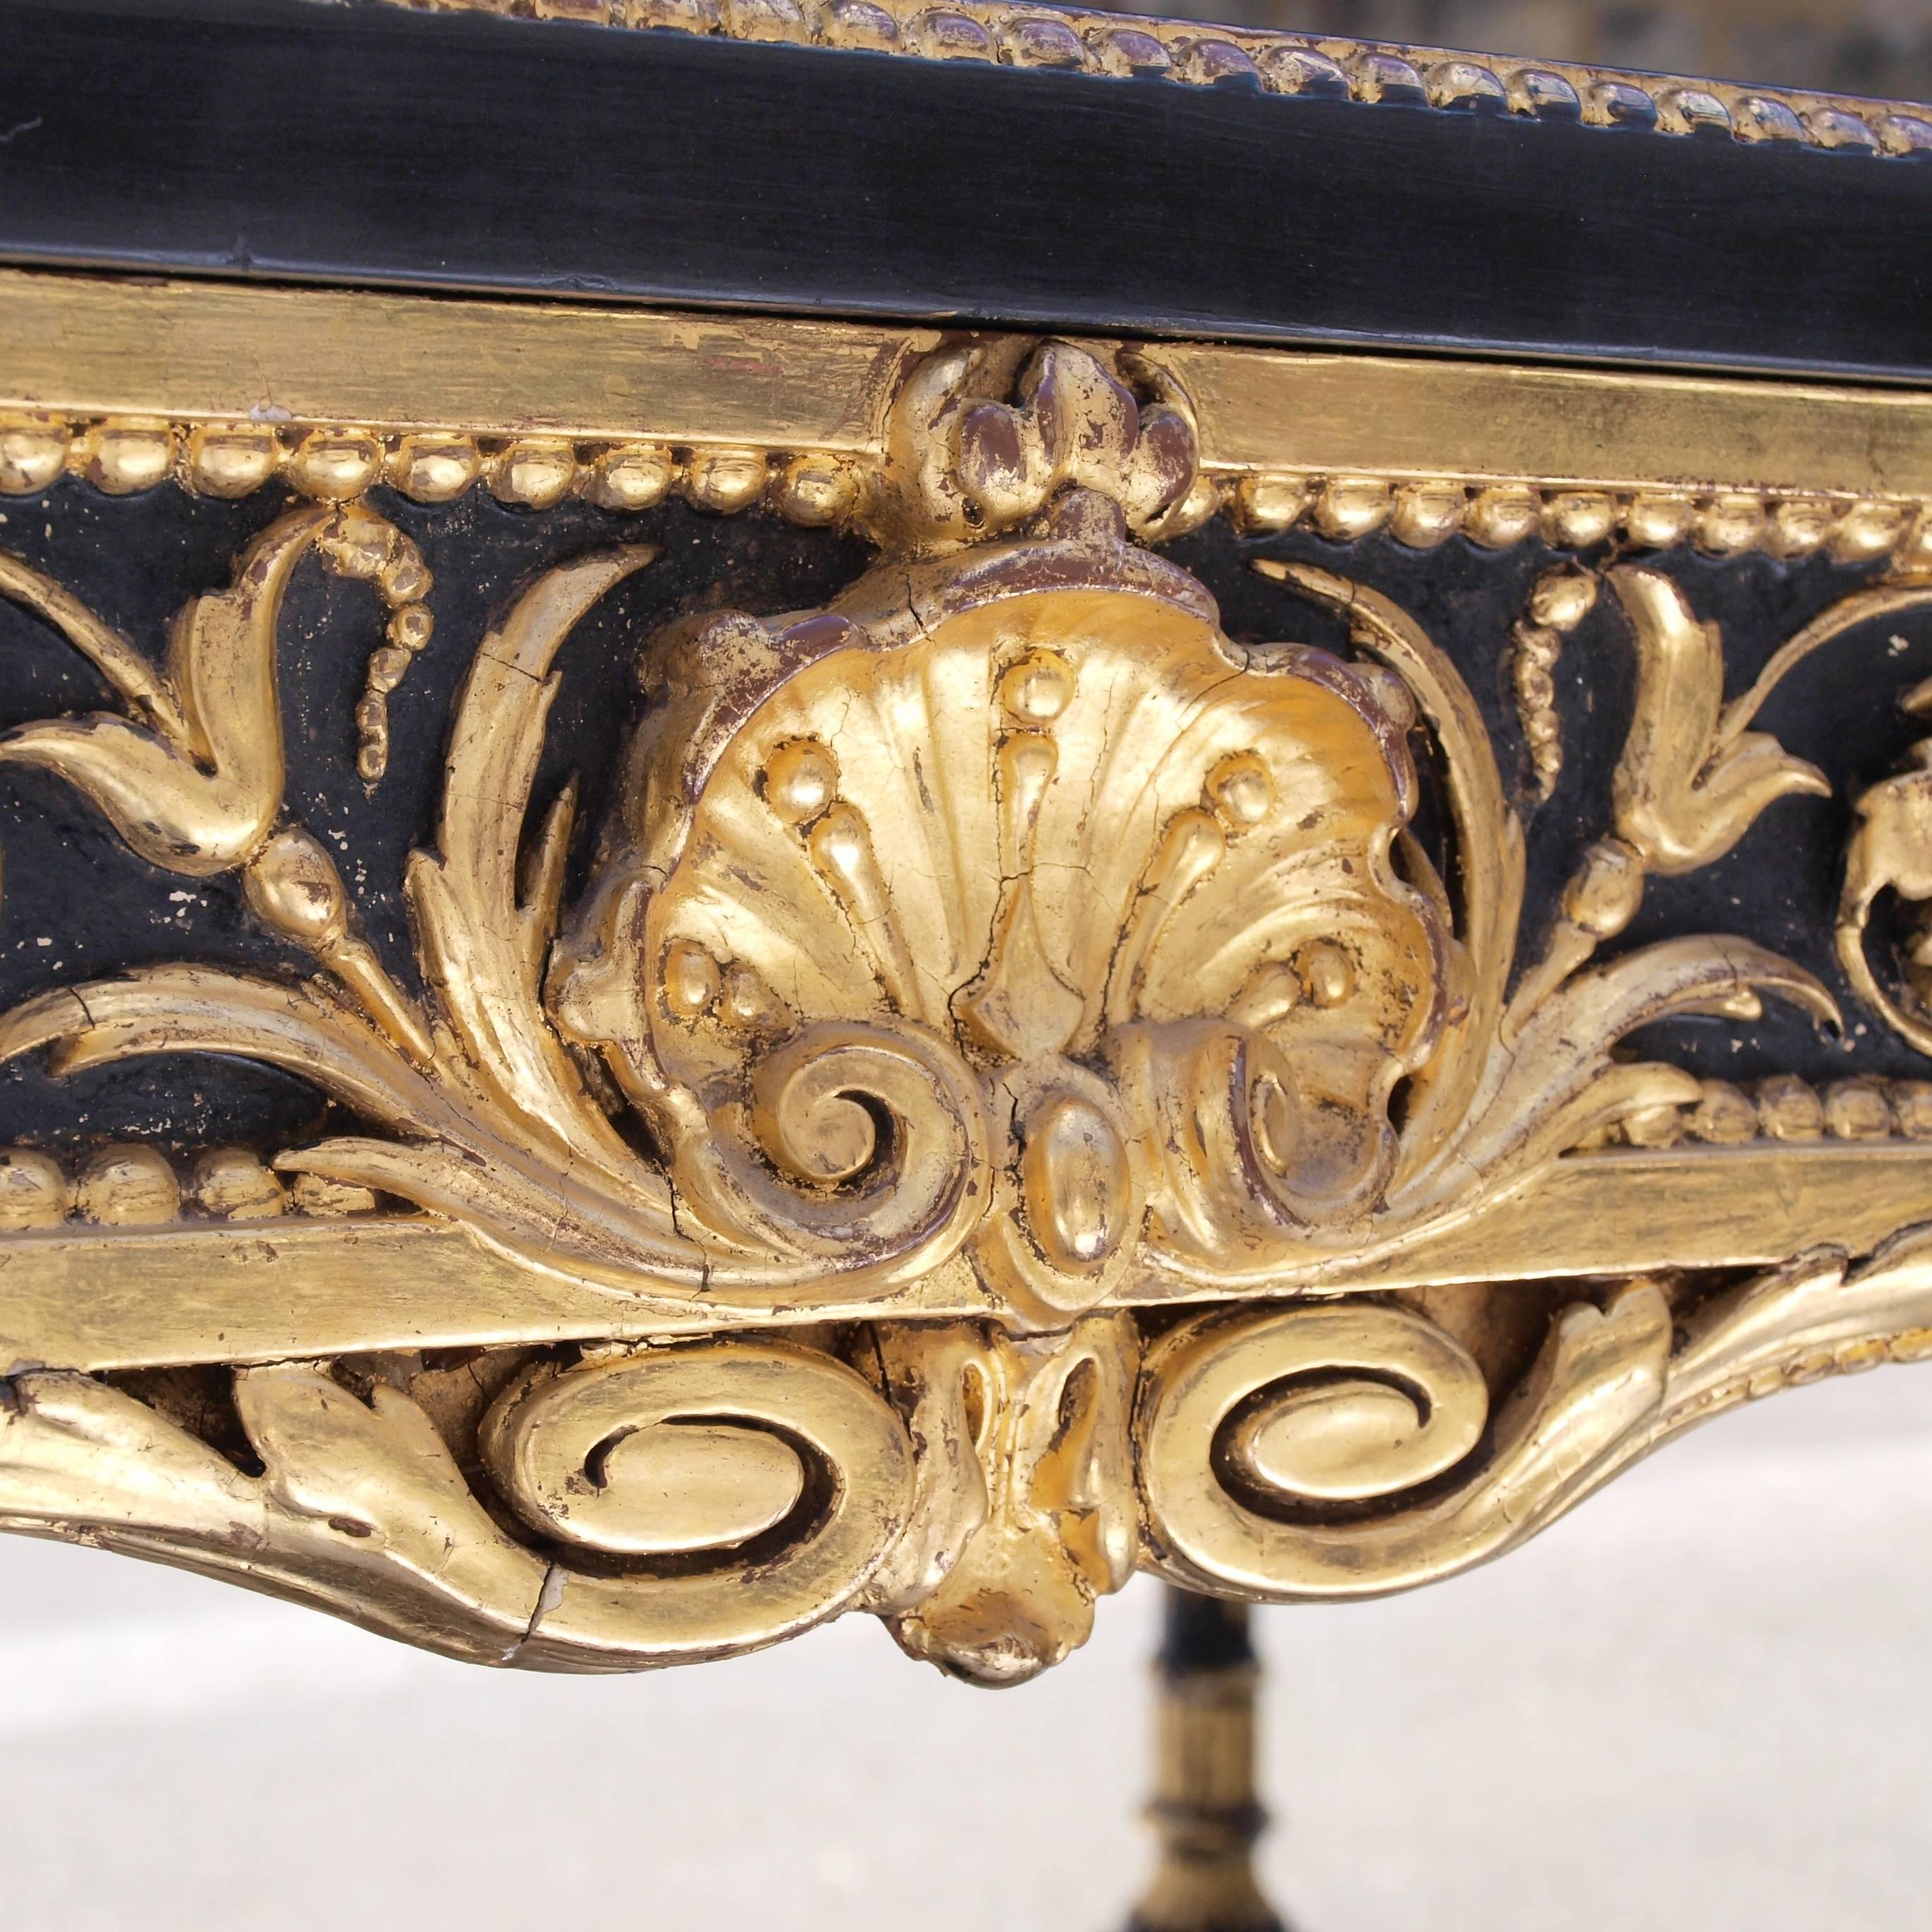 Victorian Ebonized Mirrored and Gilt Cabinet by Charles Nosotti circa 1850